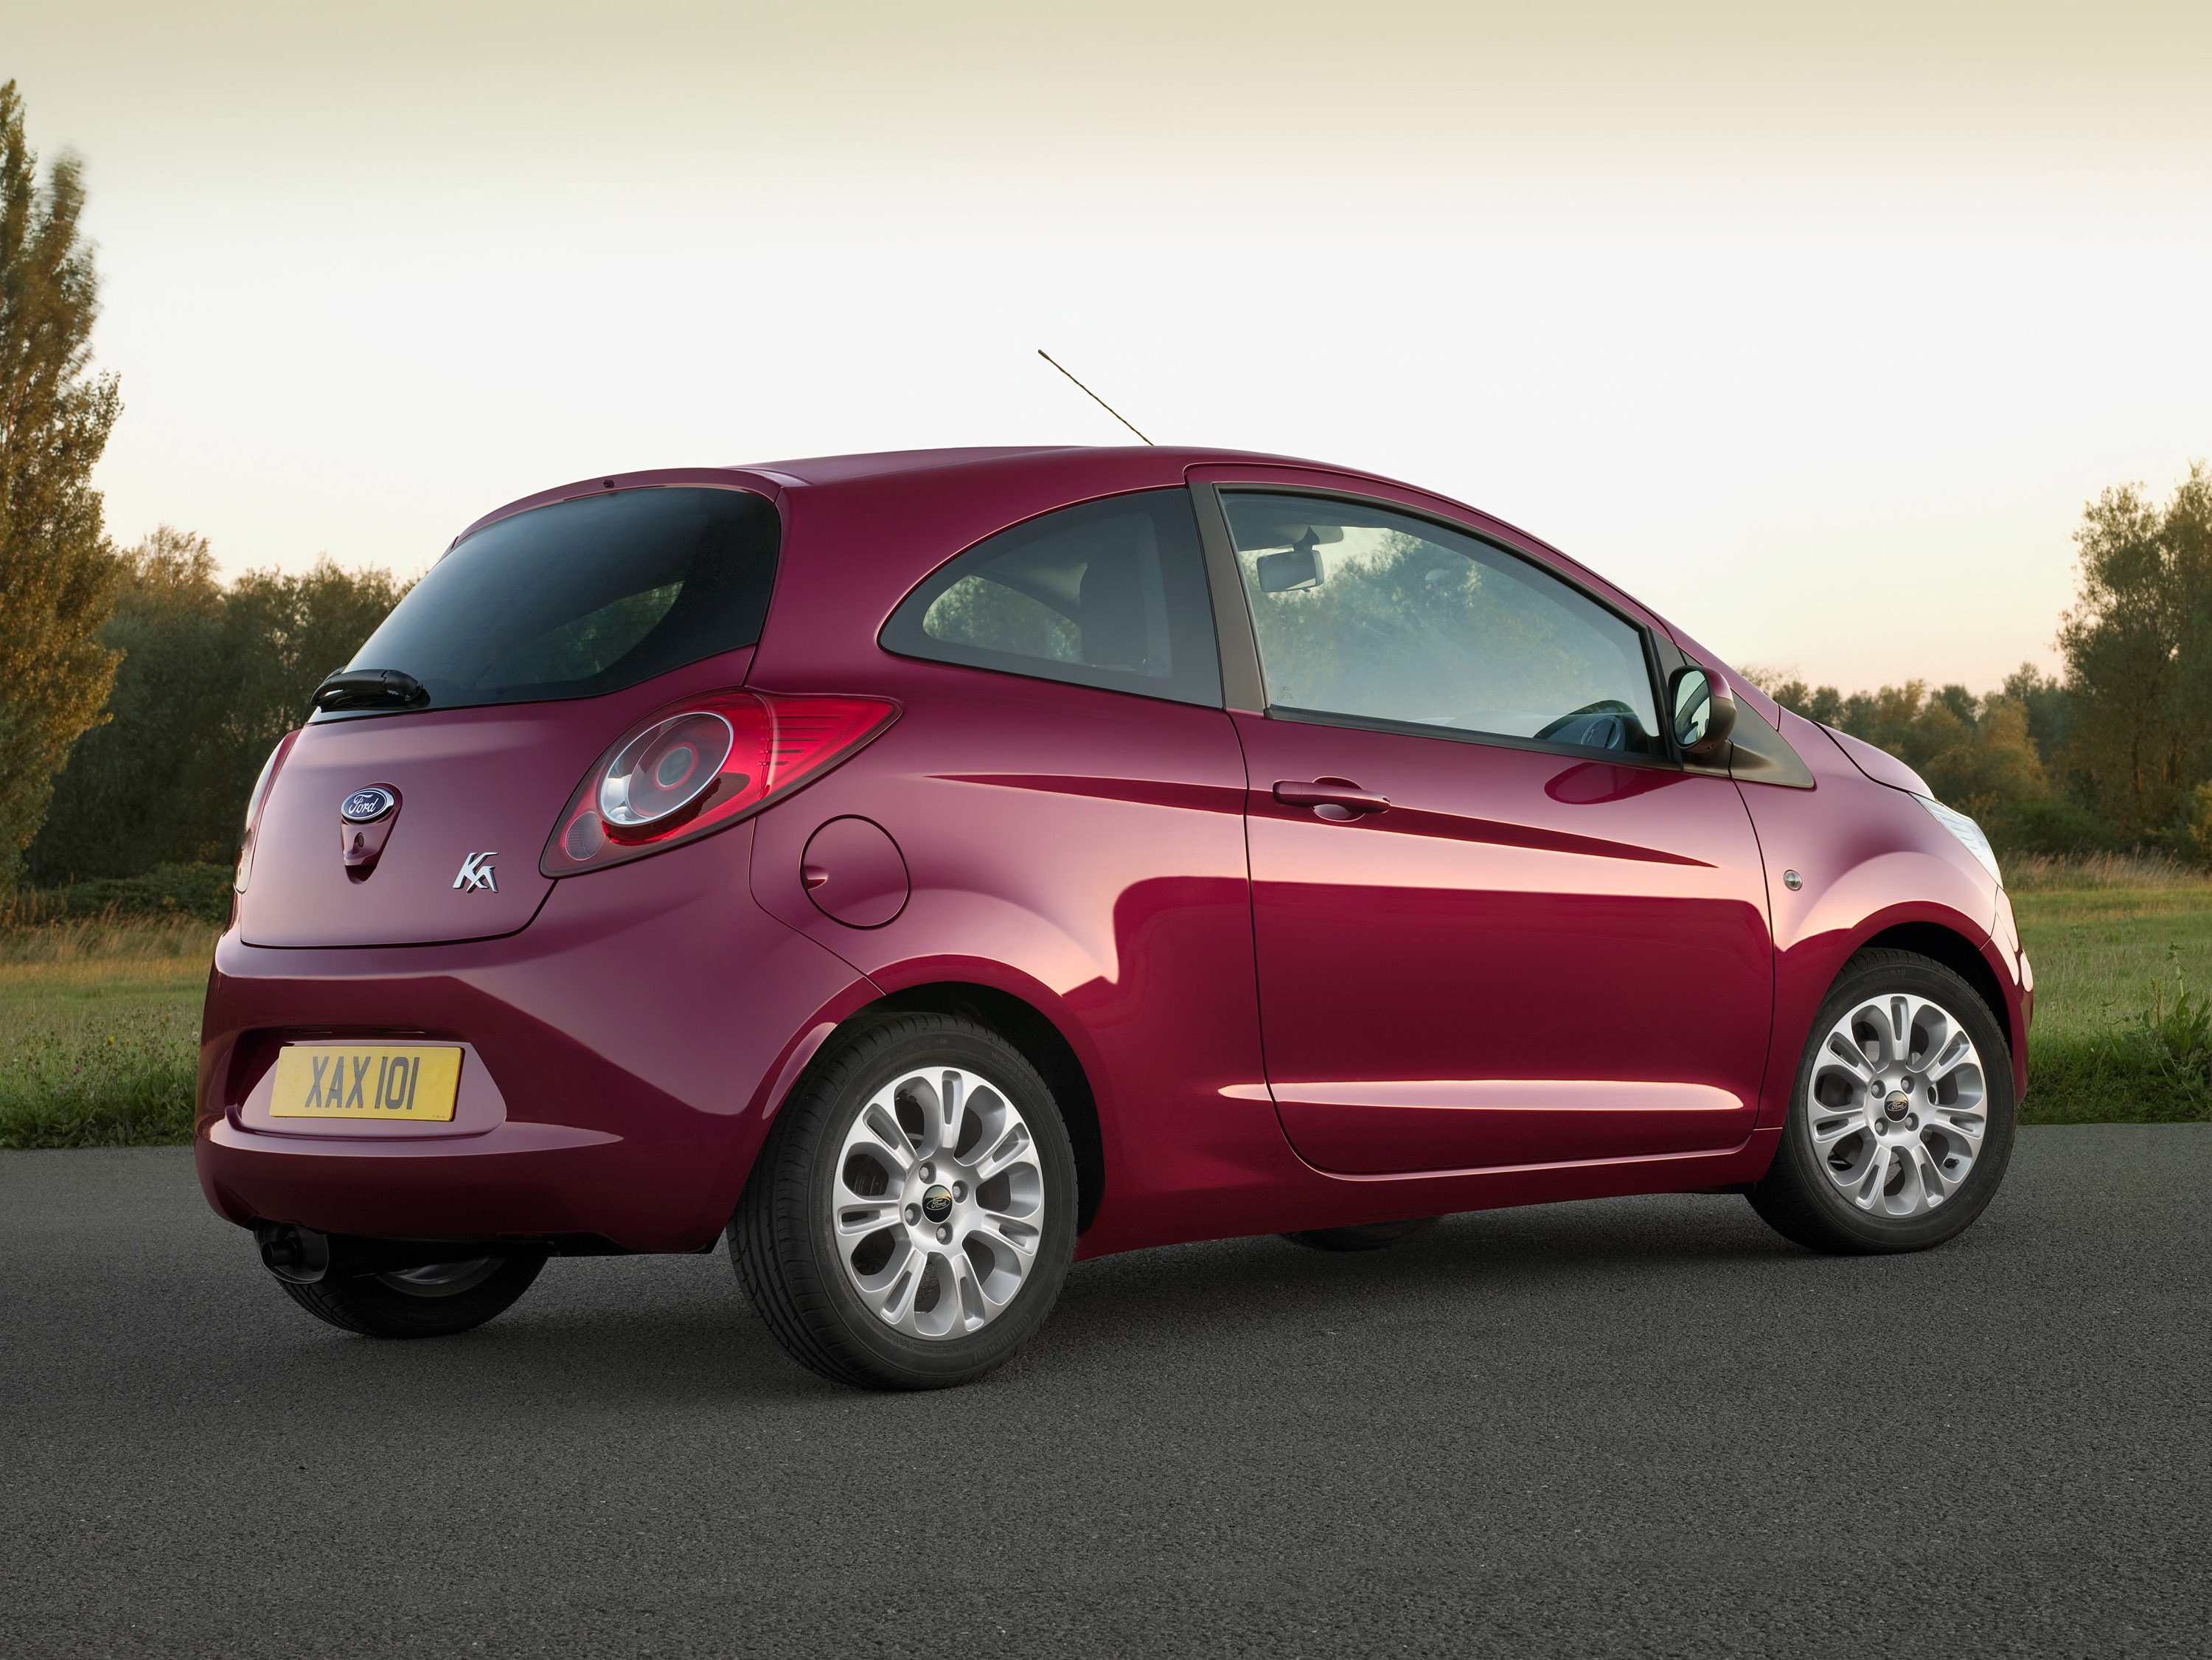 Ford announced the 2010 Ford Ka lineup